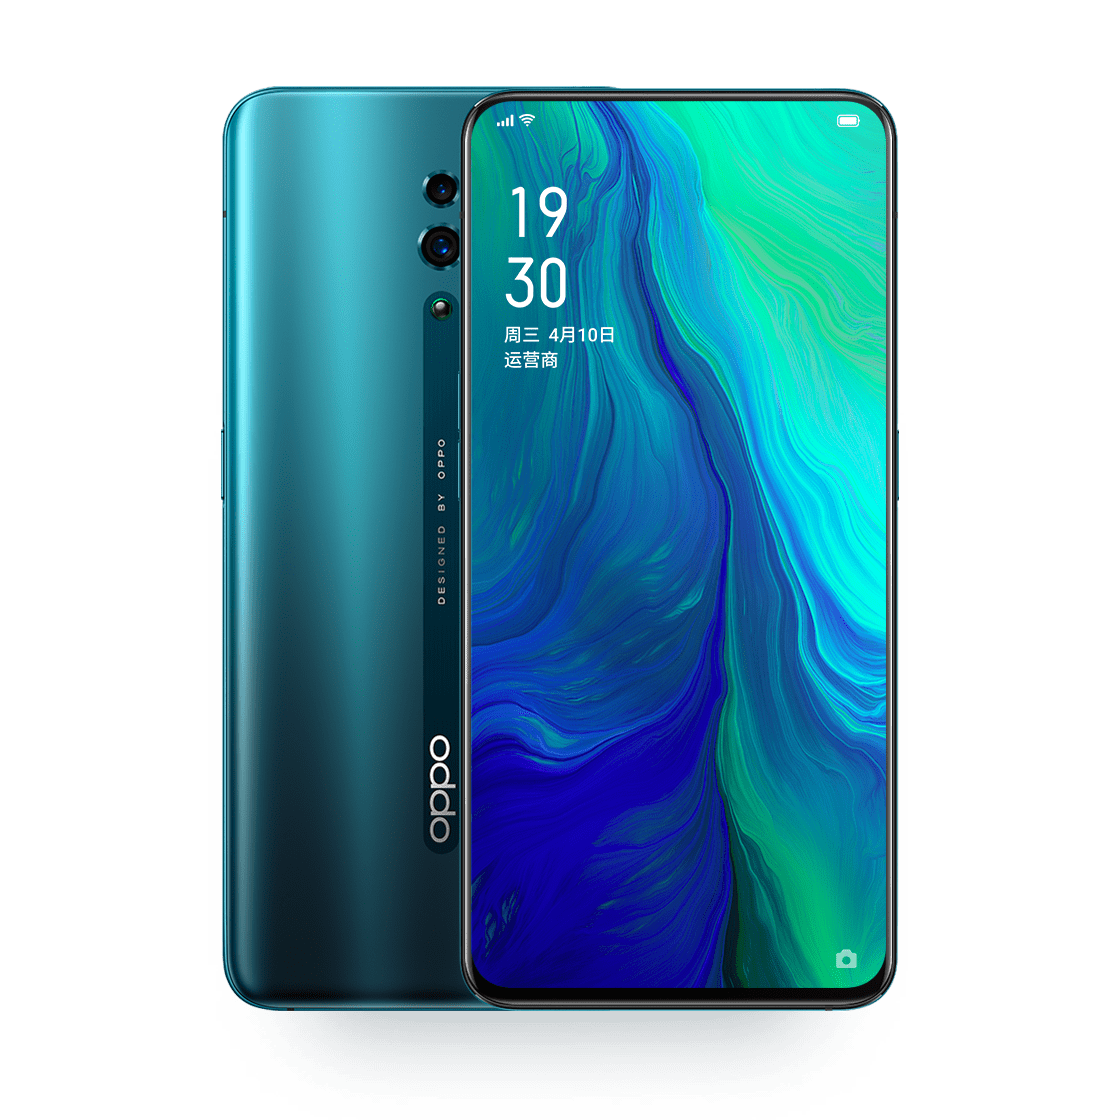 OPPO Reno variants and color options spotted on OPPO Mall - Gizmochina